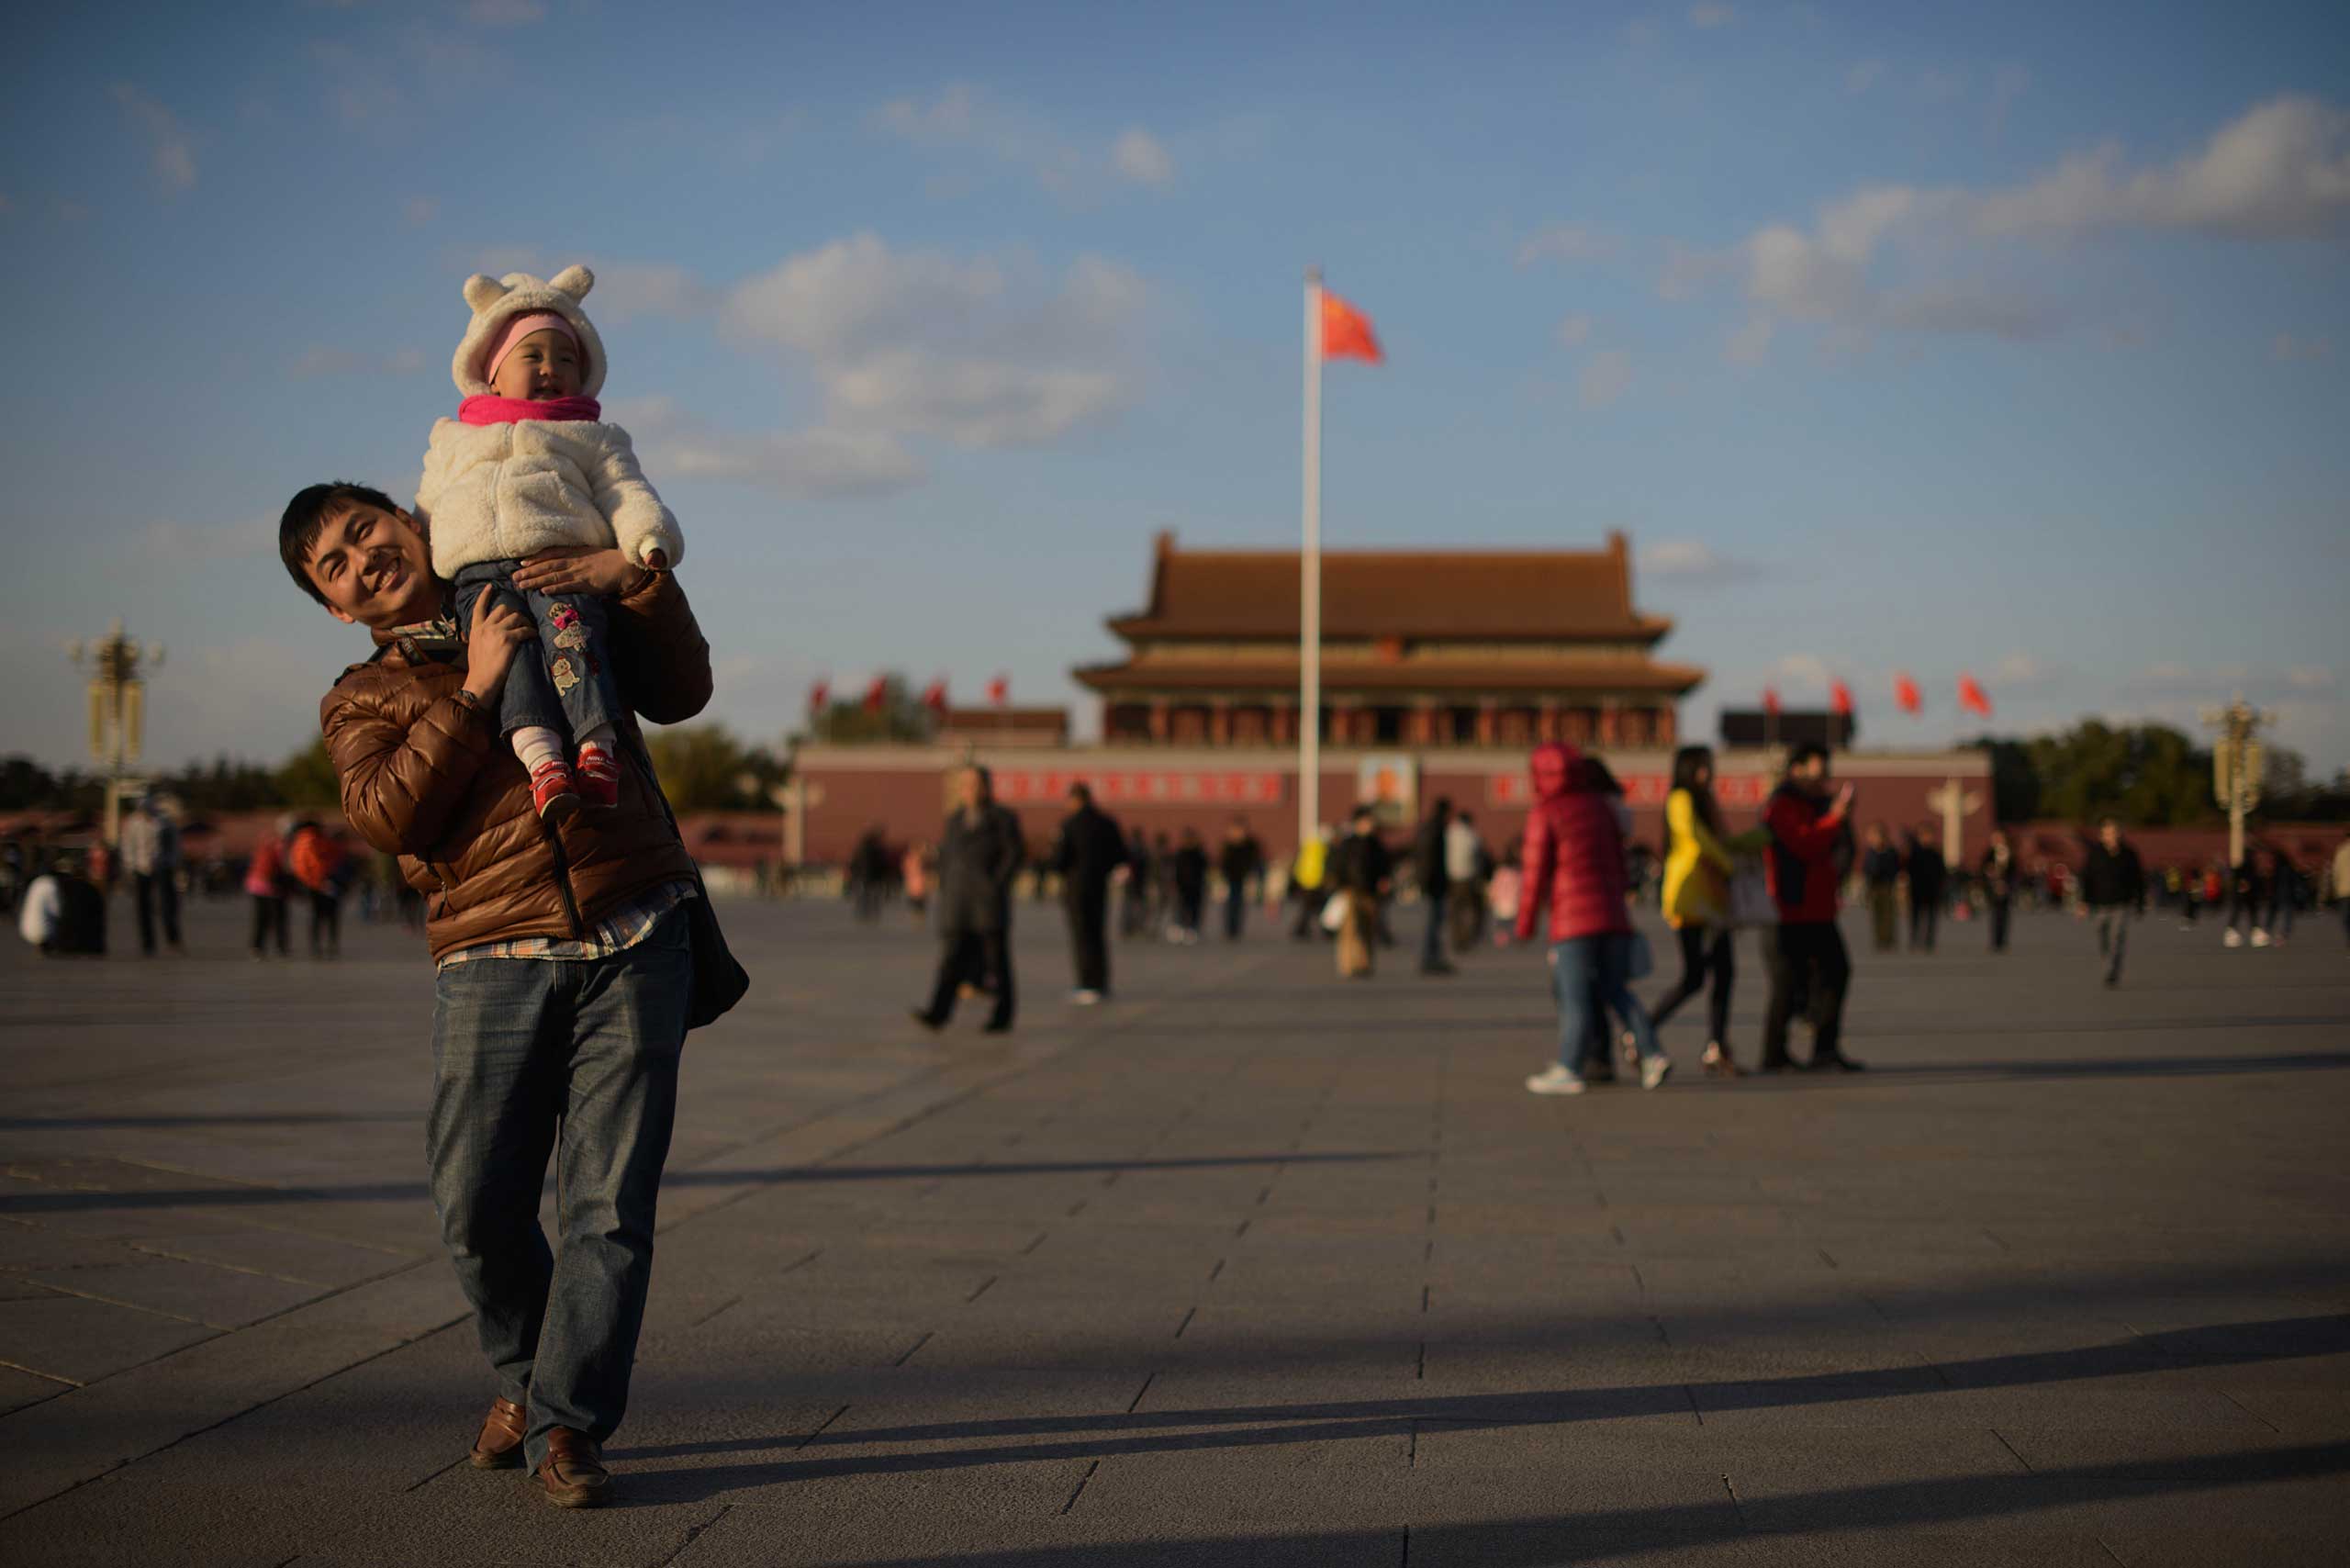 A man and child walk on Tiananmen Square in Beijing in 2013. (Ed Jones—AFP/Getty Images)